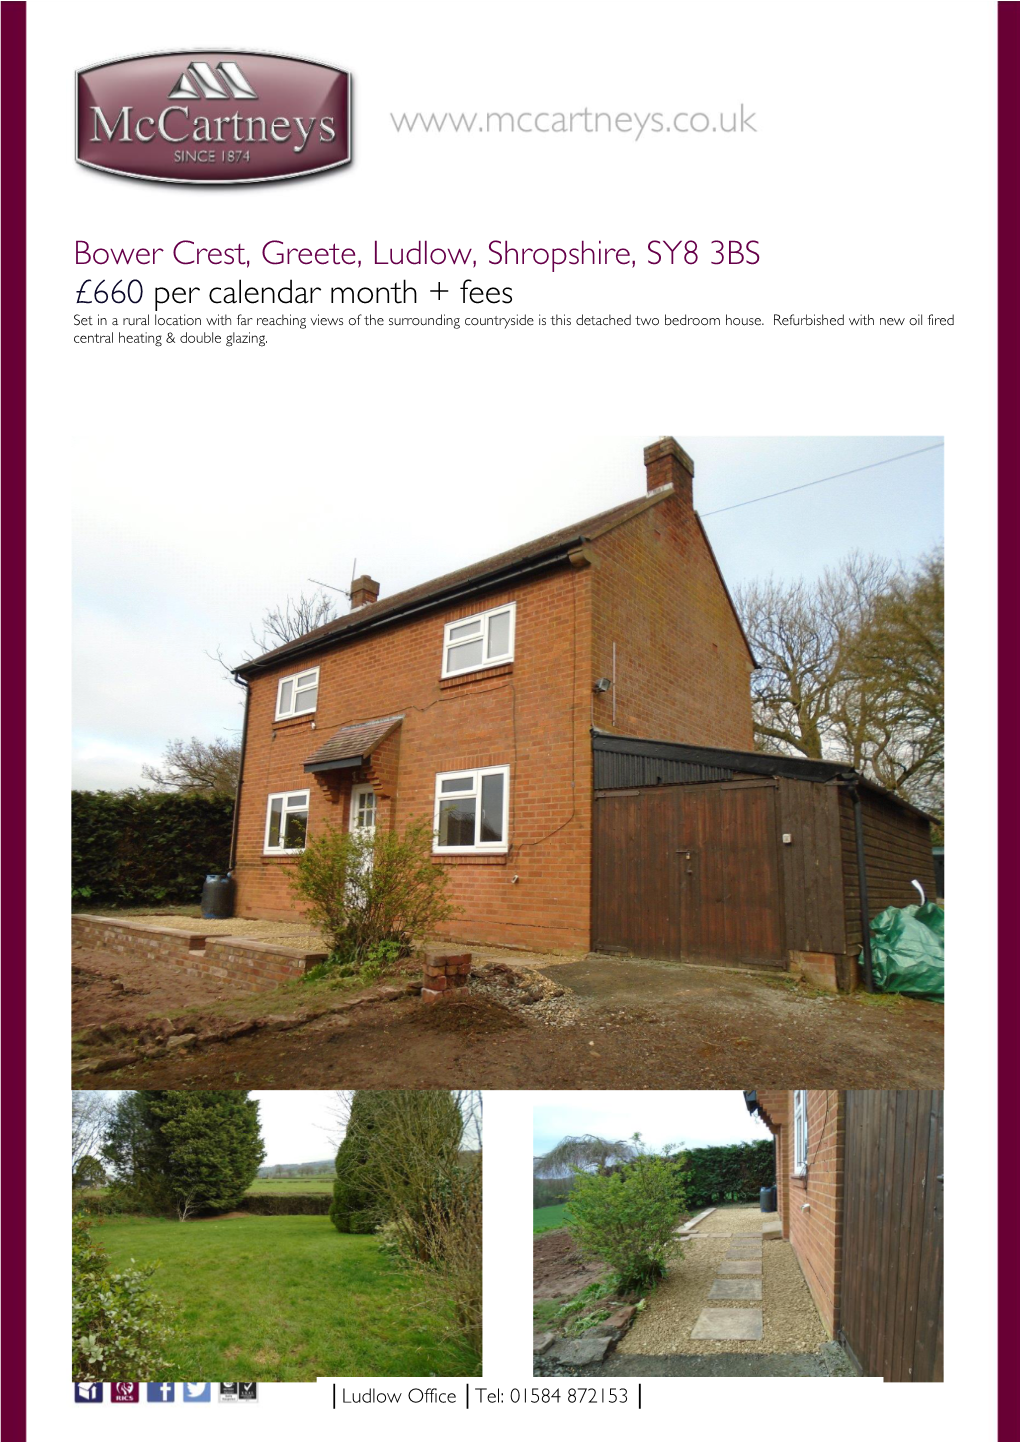 Bower Crest, Greete, Ludlow, Shropshire, SY8 3BS £660 Per